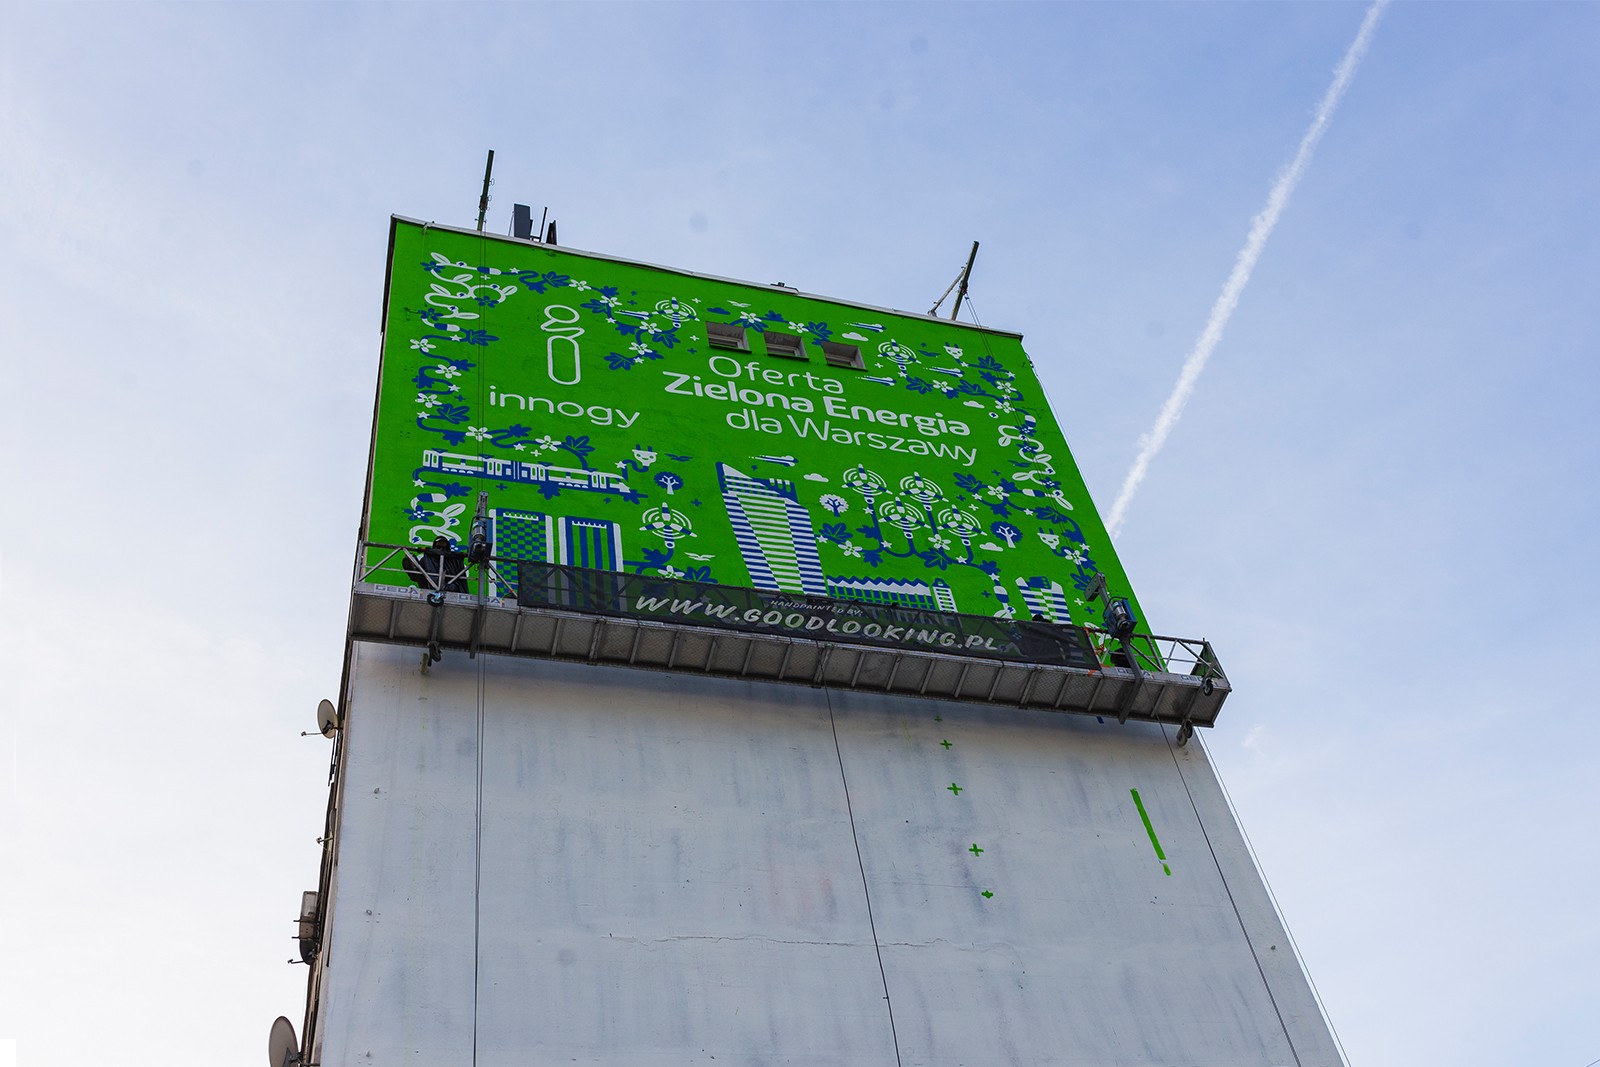 Mural for innogy on the Chmielna street in Warsaw | Green energy for Warsaw | Portfolio